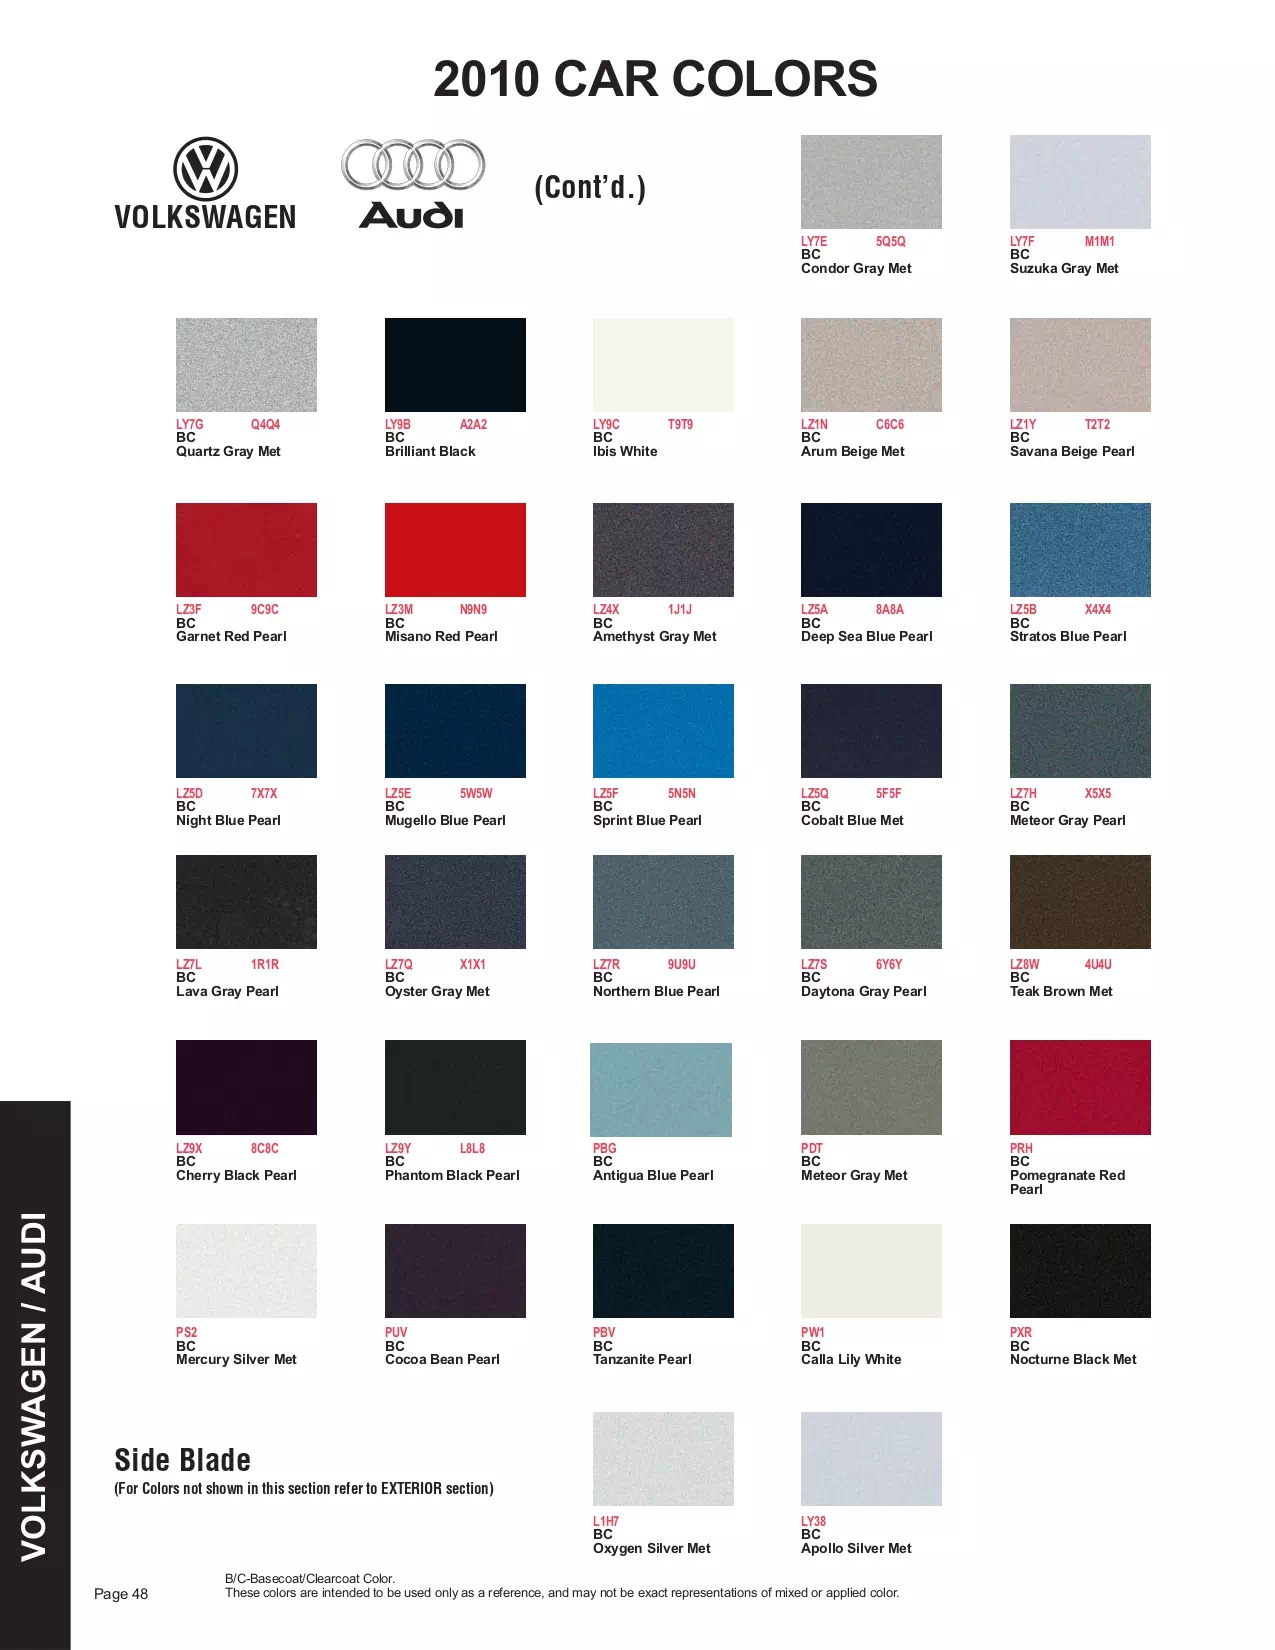 Exterior color examples and their codes used on 2010 Volkswagen and Audi Vehicles